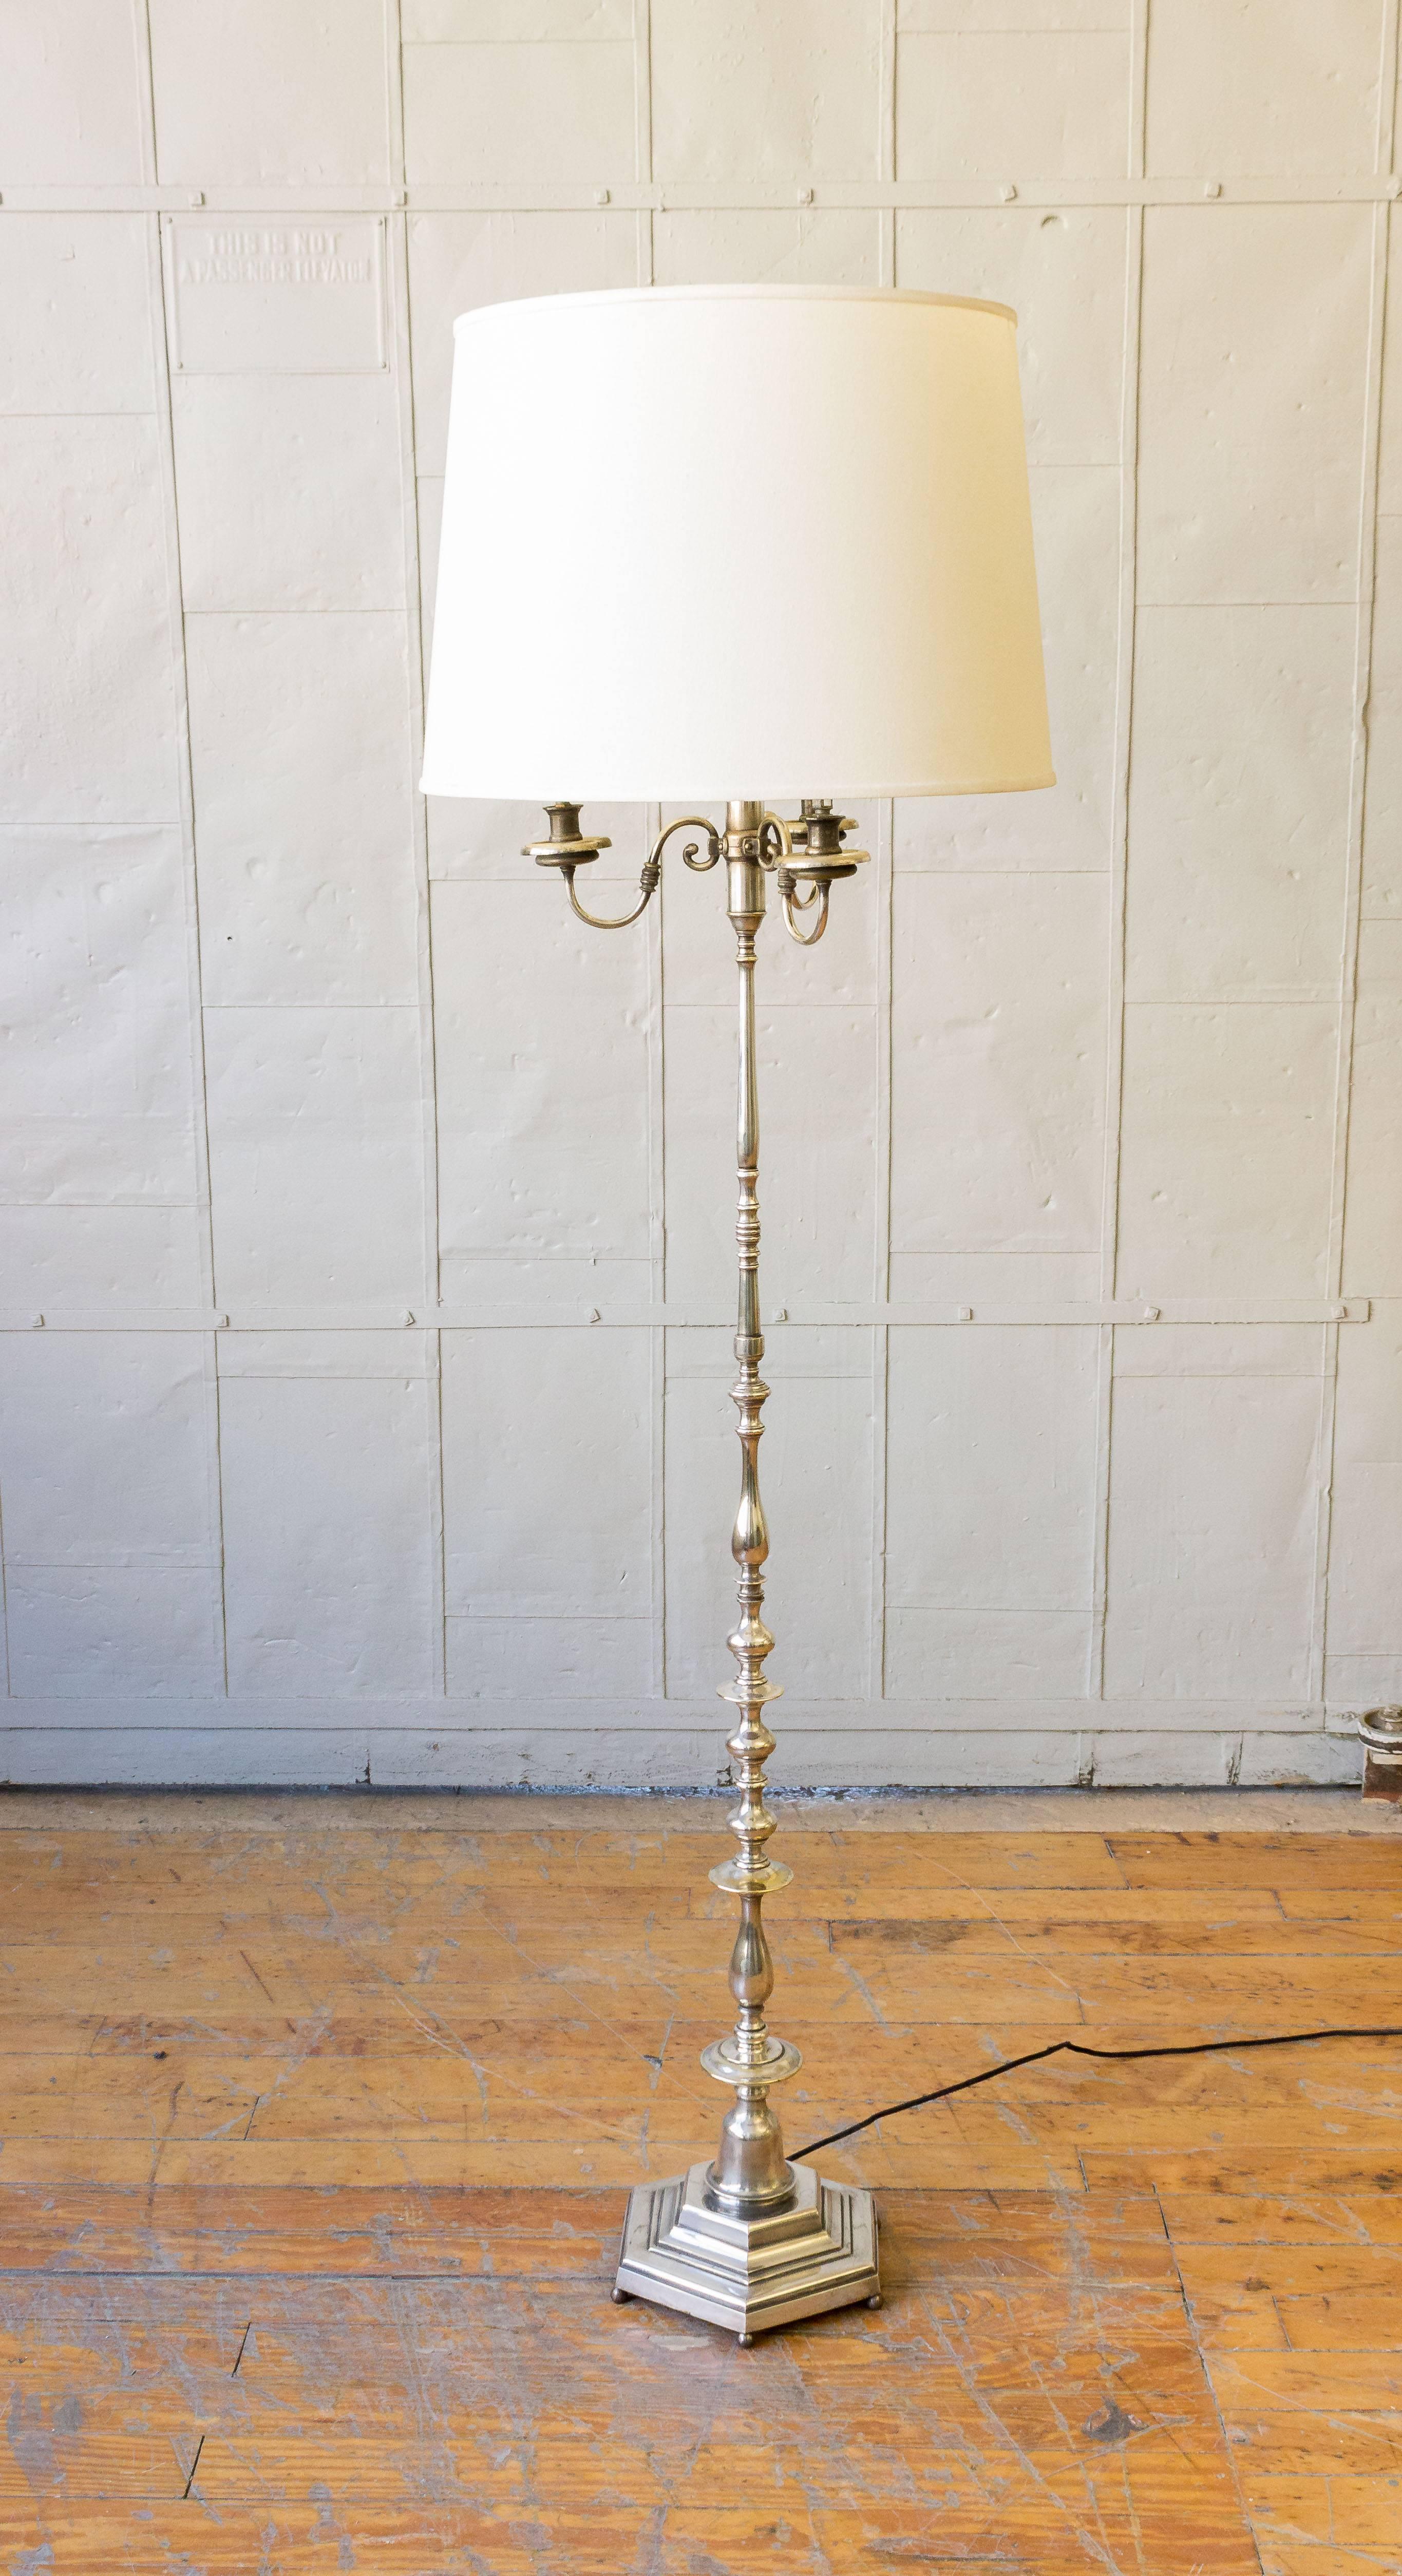 This French floor lamp from the 1940s is a remarkable vintage piece that features a silver plated brass construction. Resting on a hexagonal base, this lamp adds a touch of elegance to any room. While there may be some tarnishing and wear on the